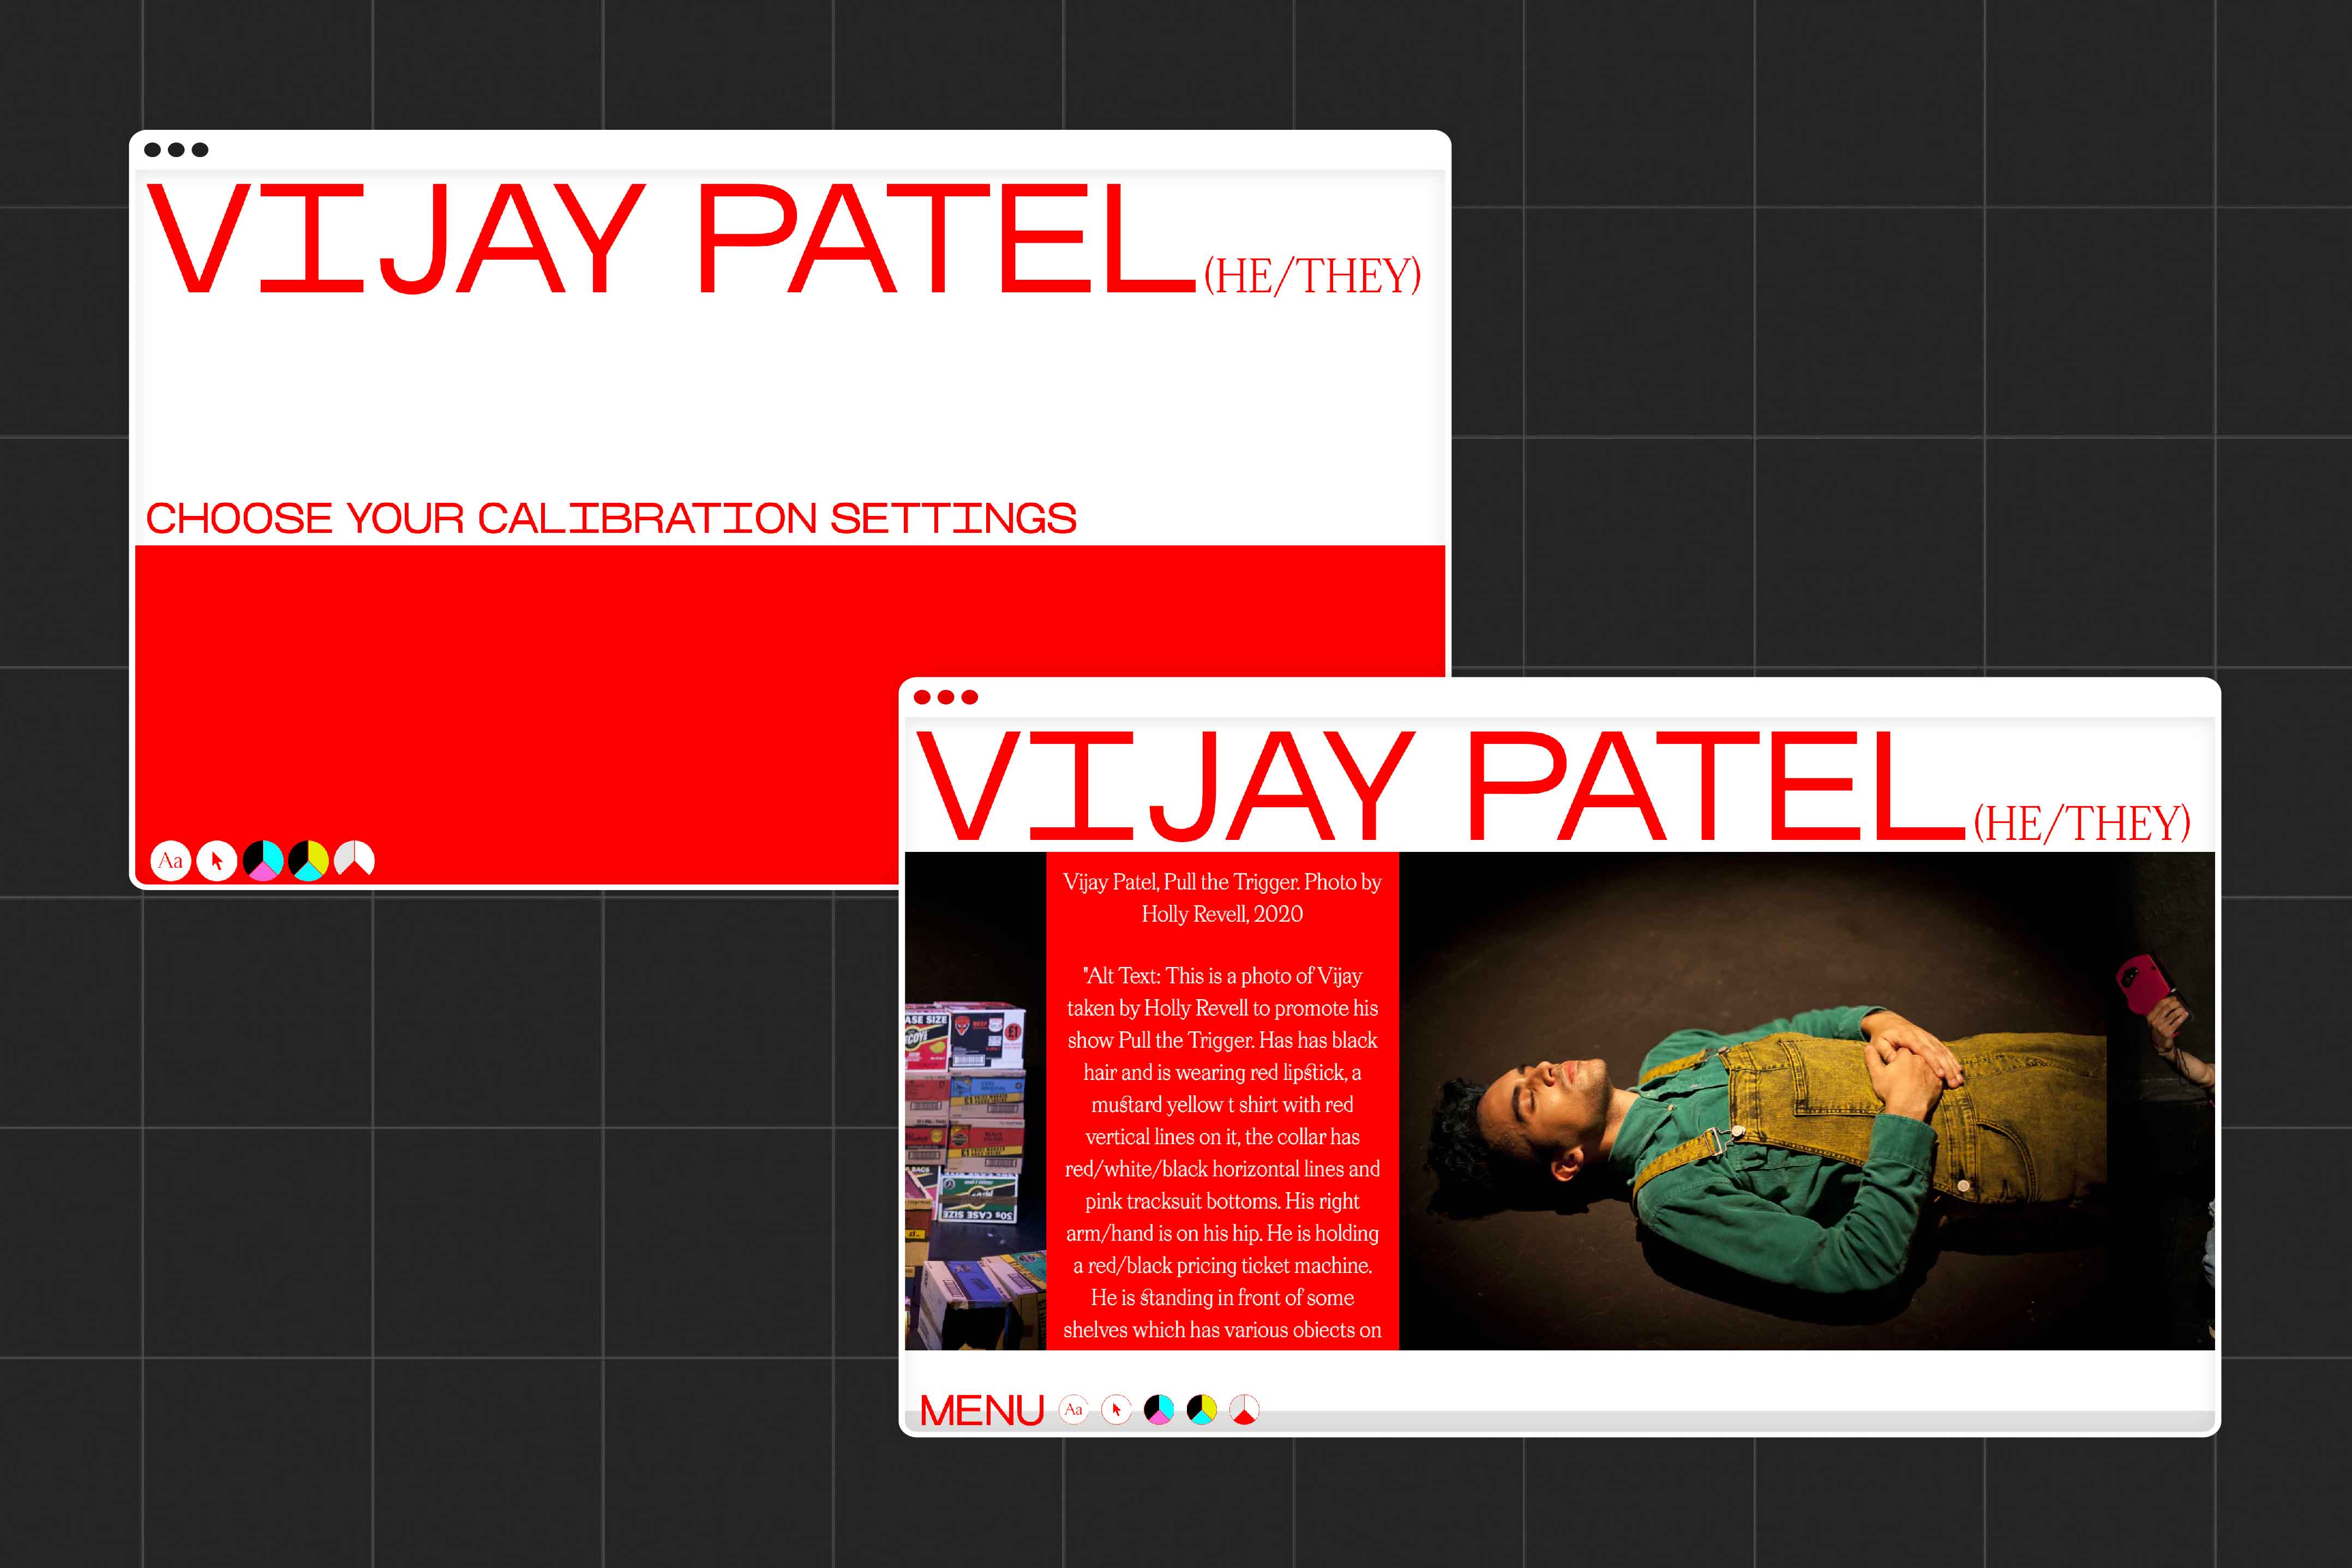 Images of Vijay Patel's website, the image shows the calibration page, which allows users to make accessibility changes to the website before they enter the site, the image also shows Vijay's website homepage, showing multiple images of his performances, with a hover state revealing more information.